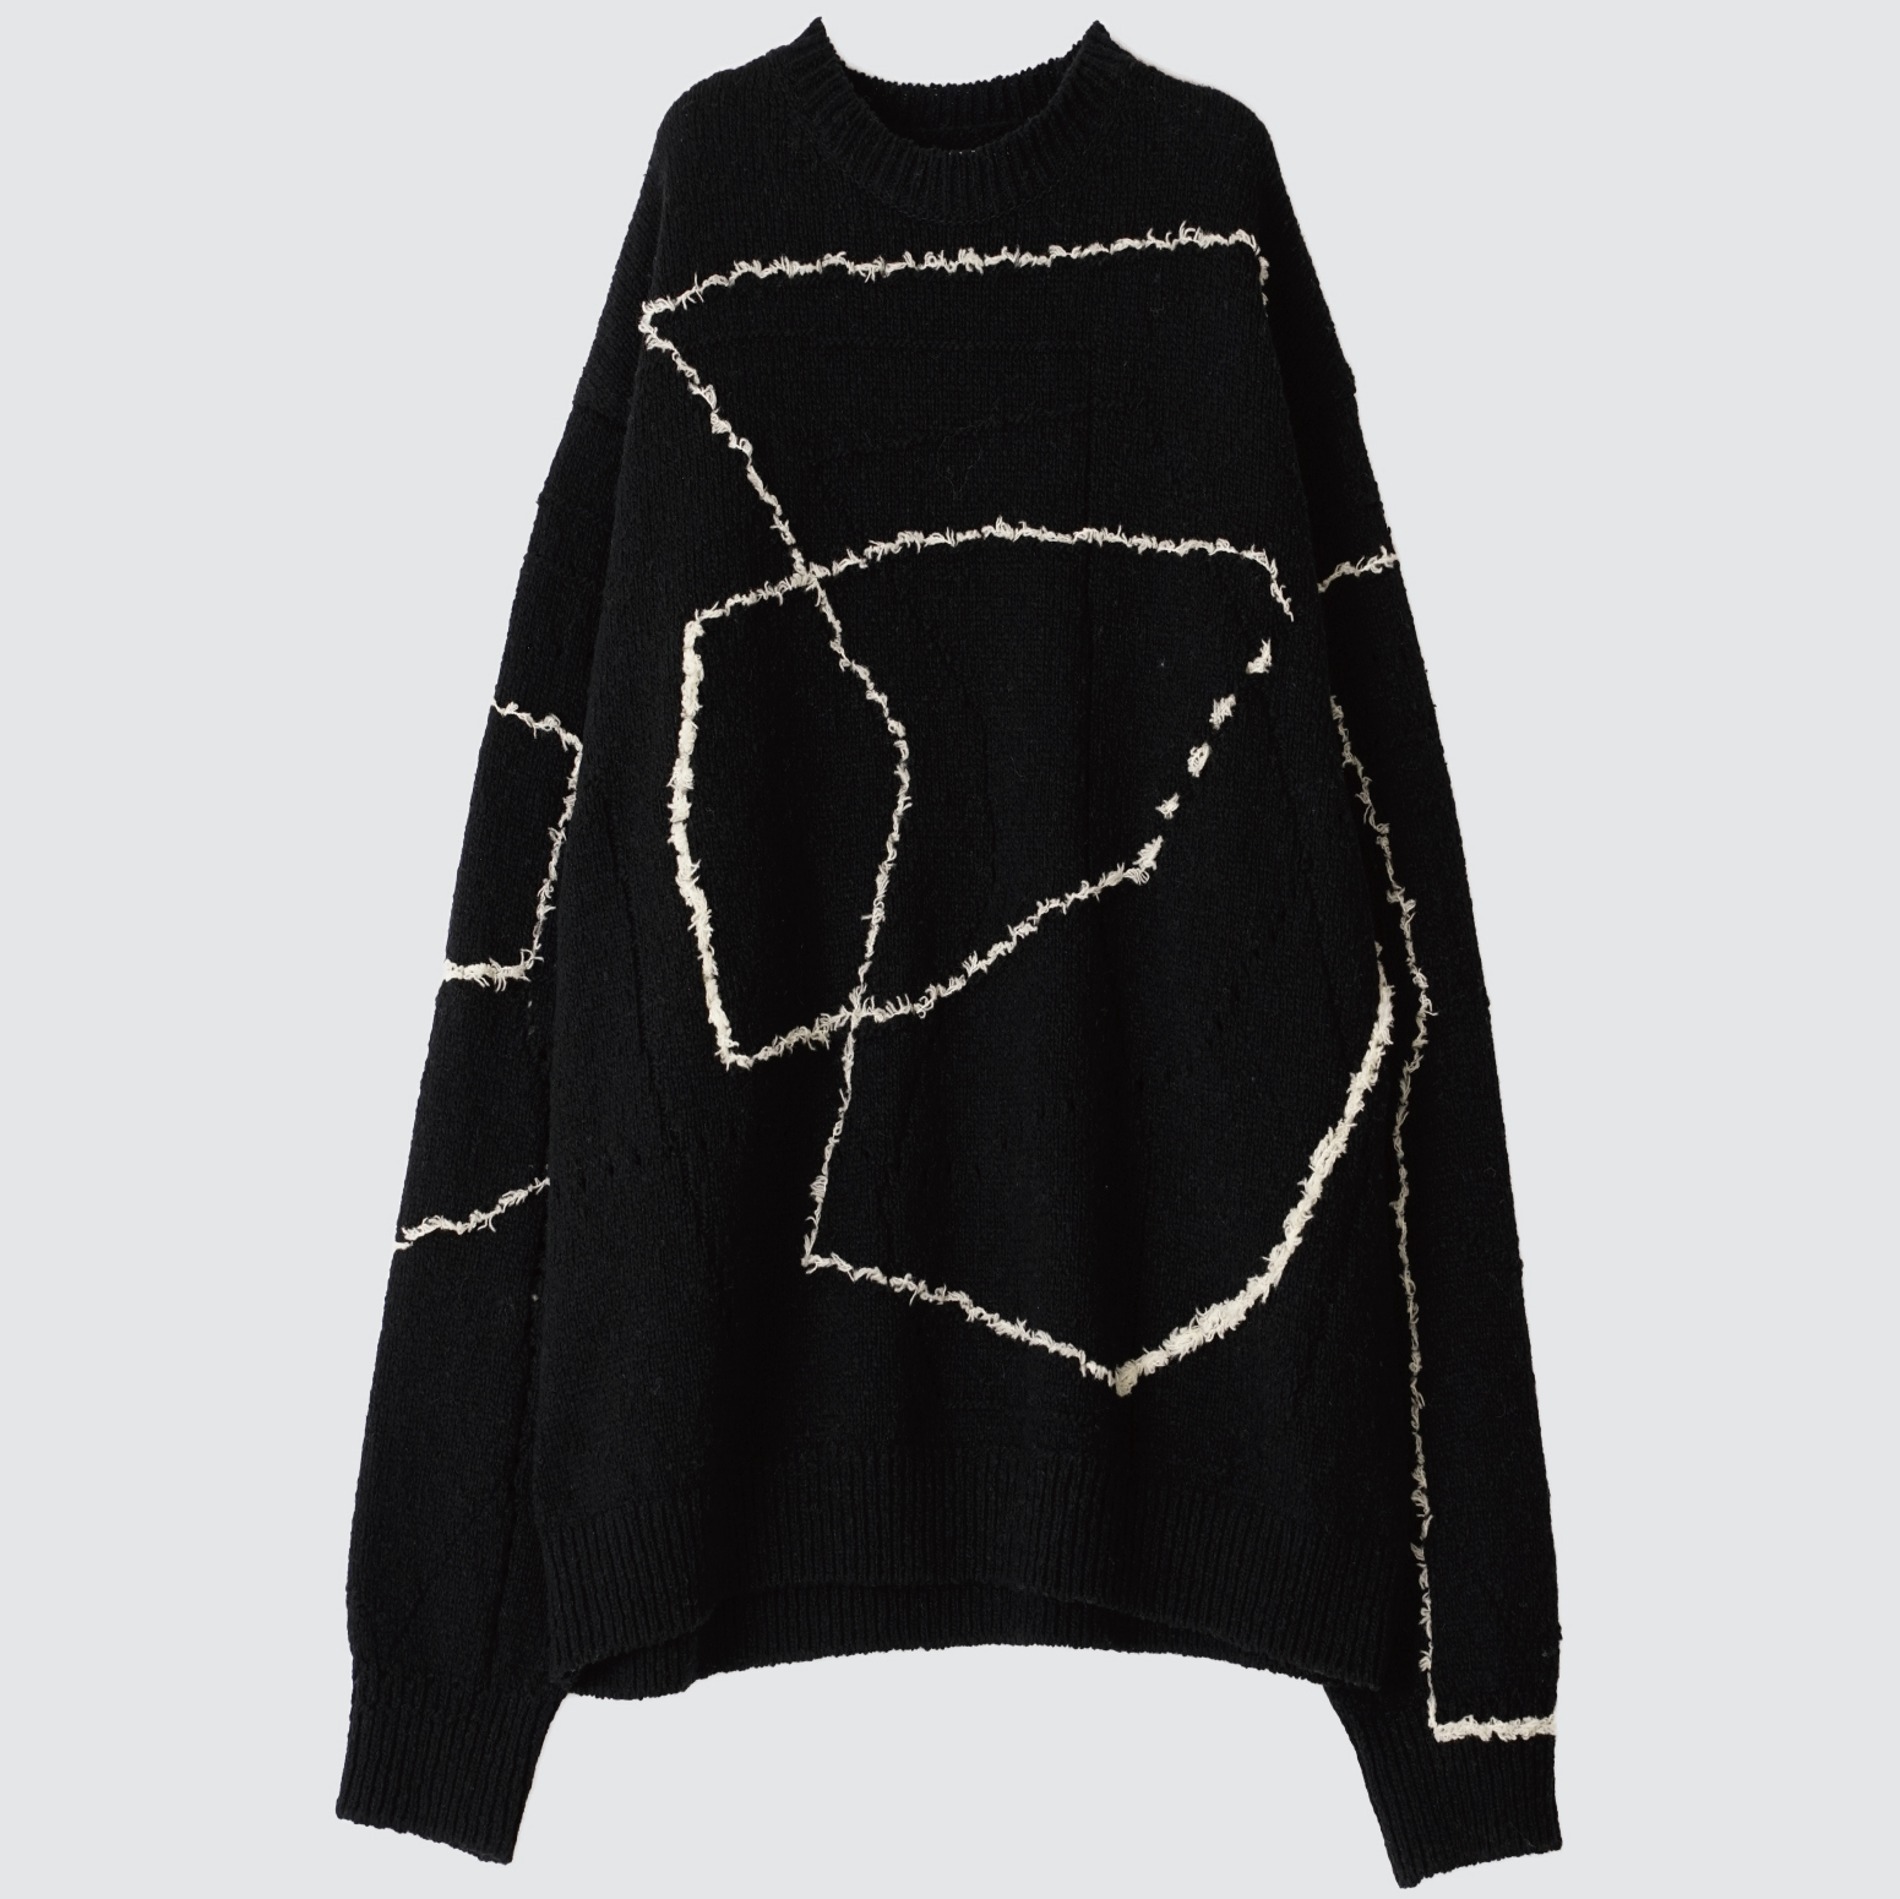 AW23 YOKE CONTINOUS LINE EMBROIDERY SWEATER BLACK